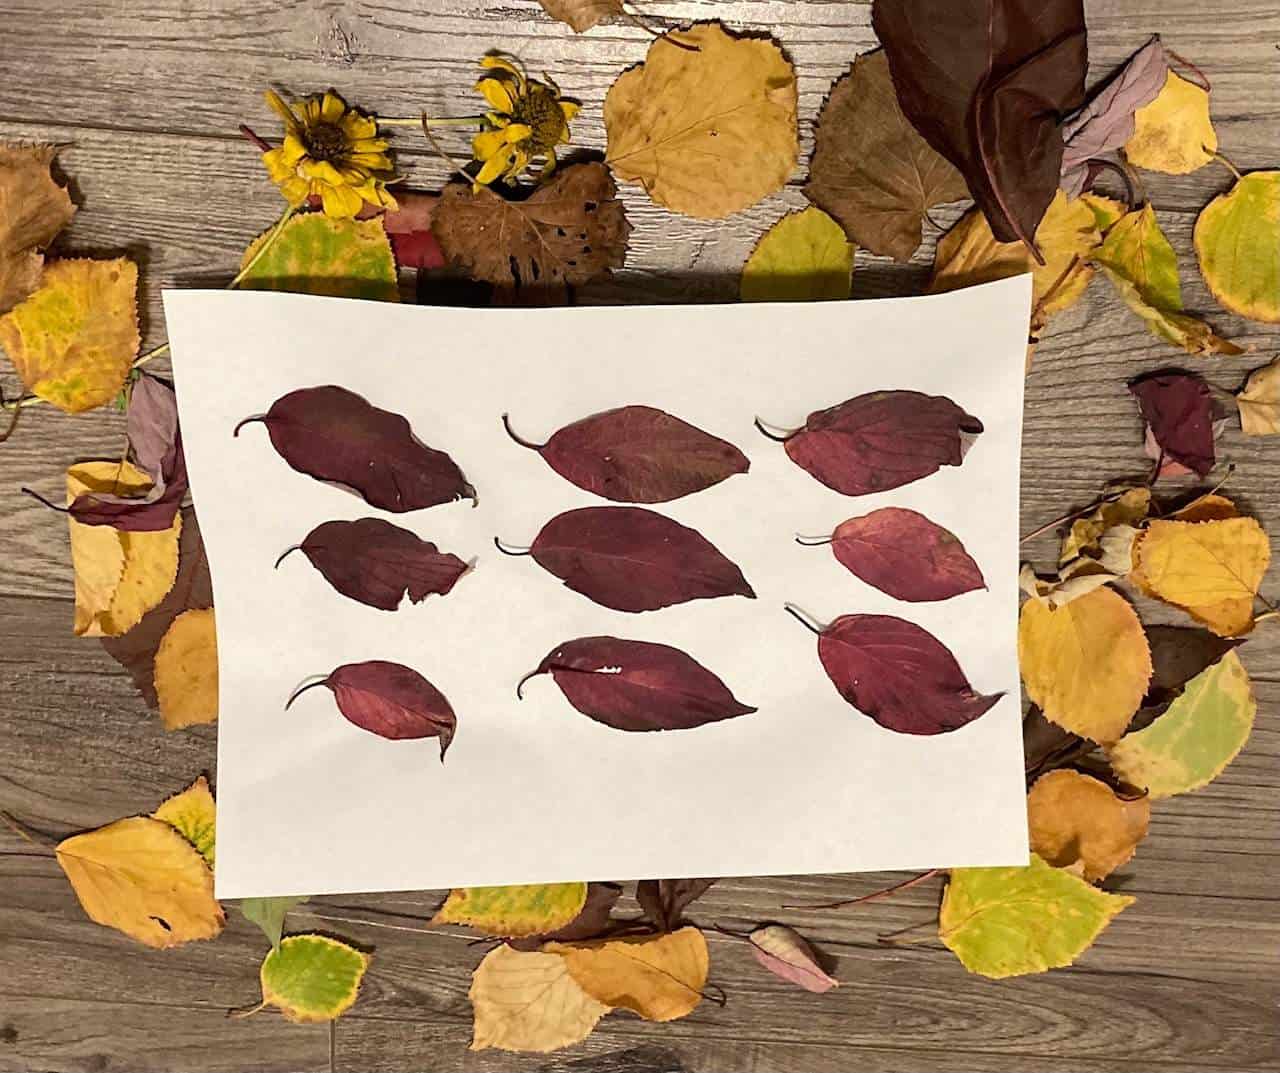 Wild Math - Leaves arranged in an array to show illustrate multiplication